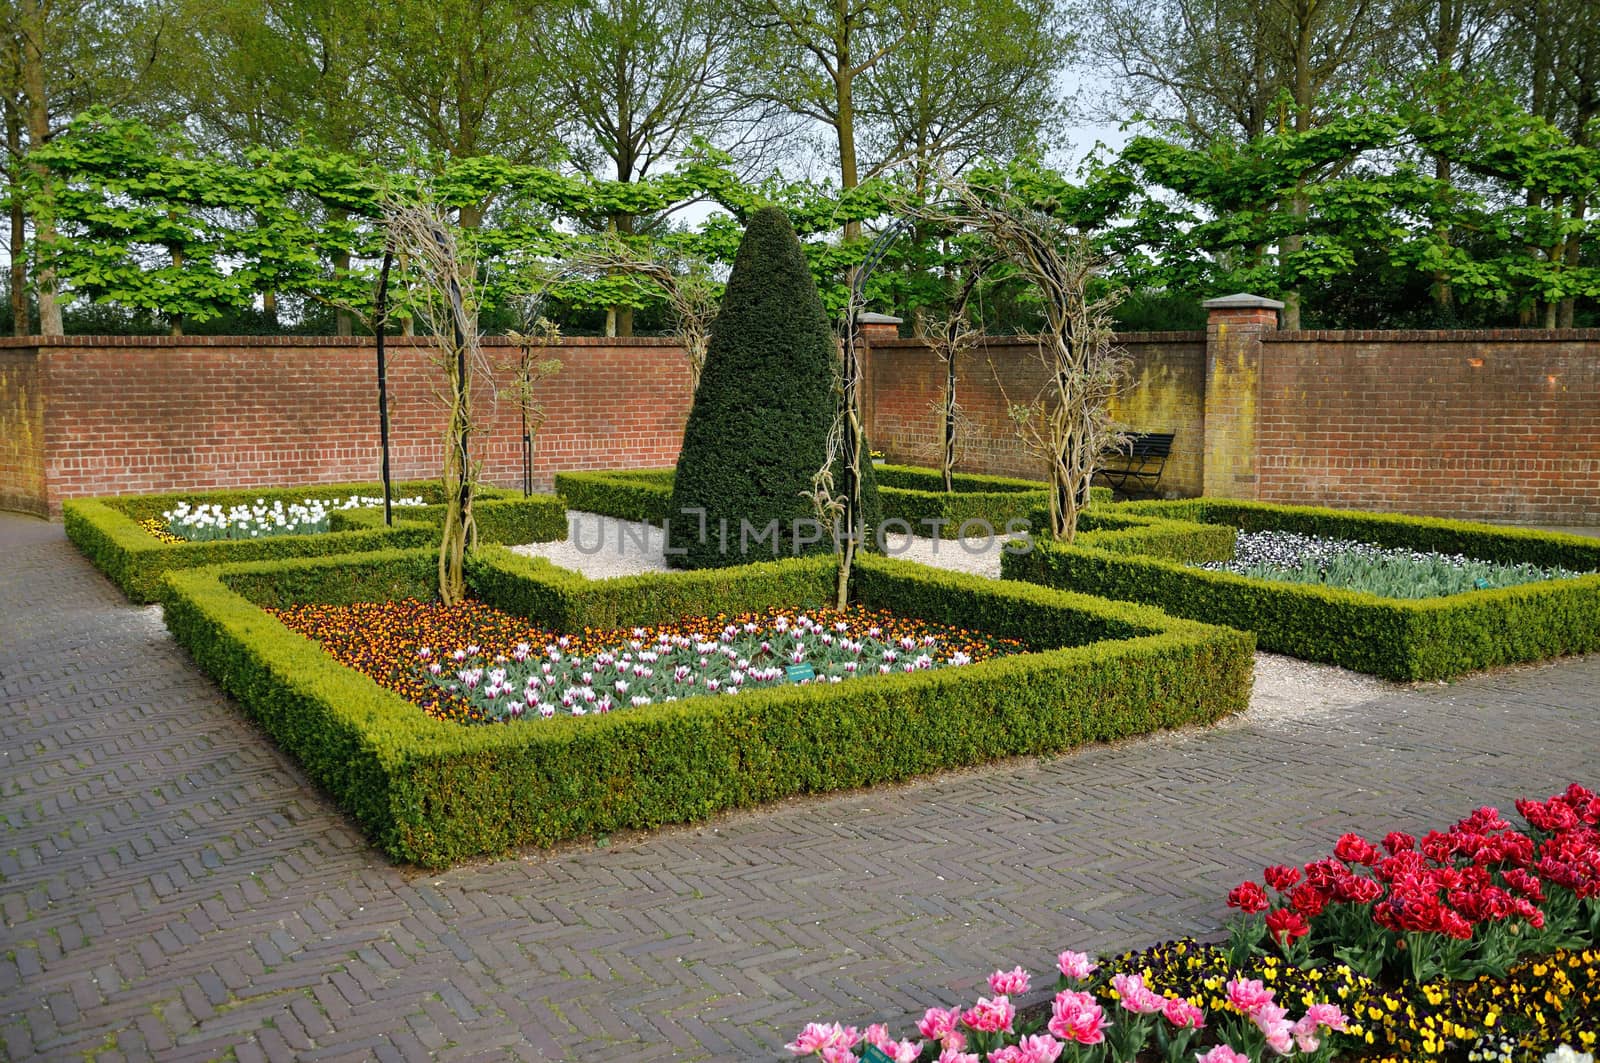 Garden with small bushes, white, orange and red tulips and brick by Eagle2308